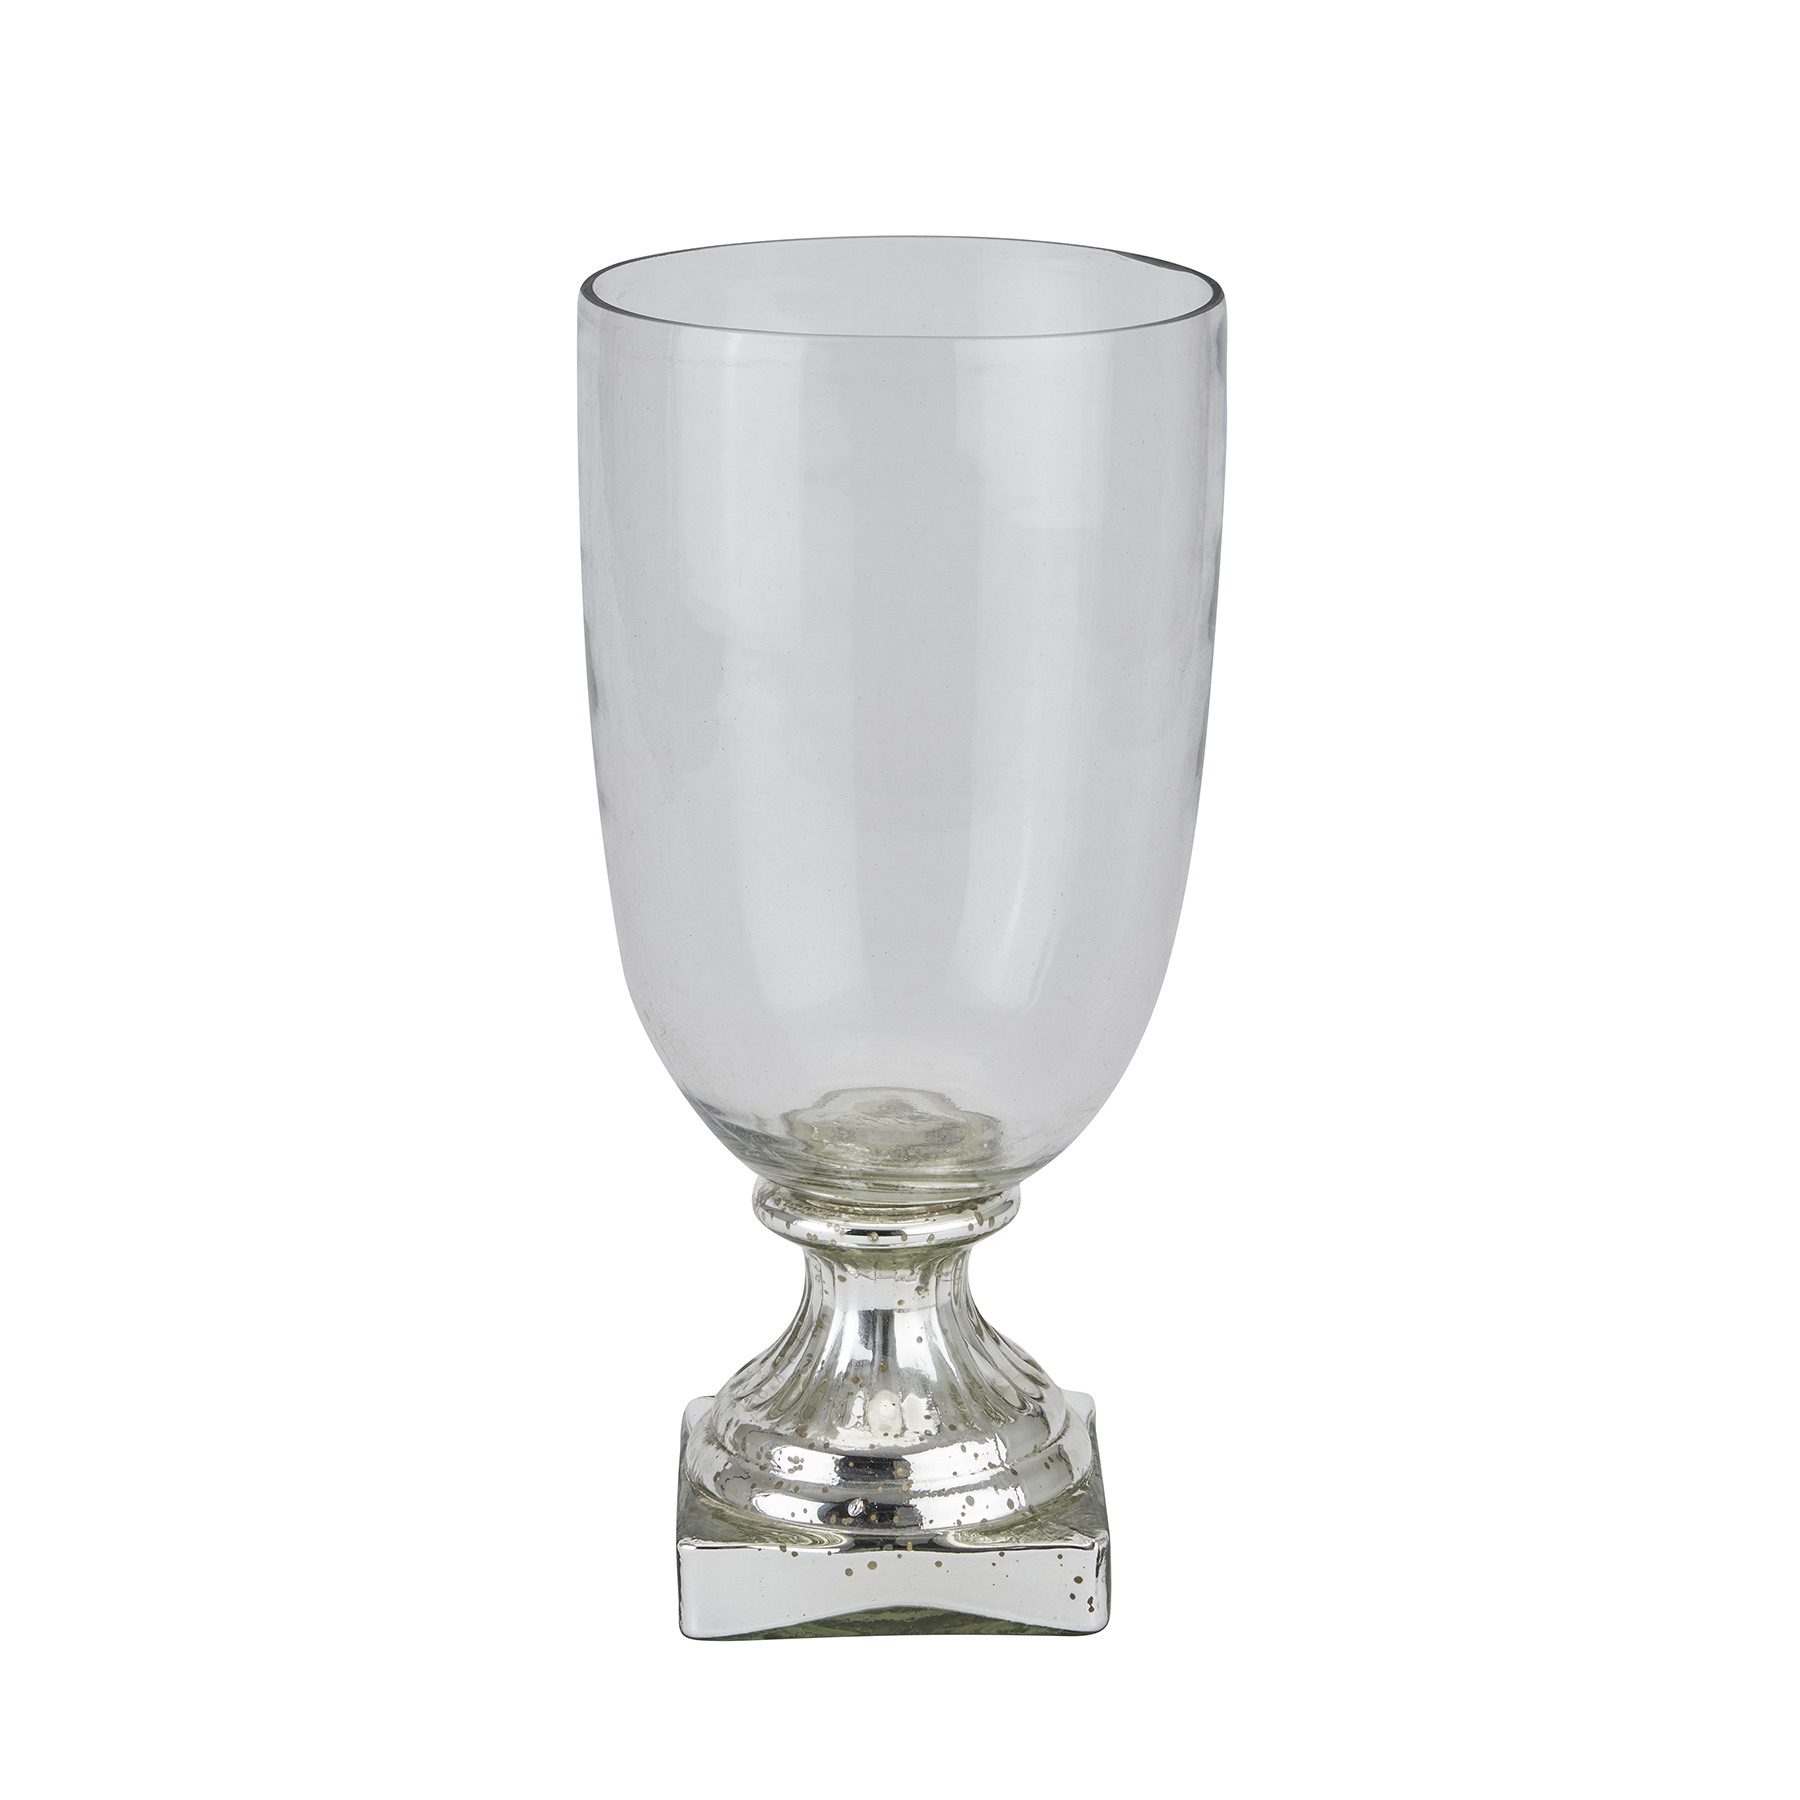 Silver Footed Hurricane Lamp - Image 1